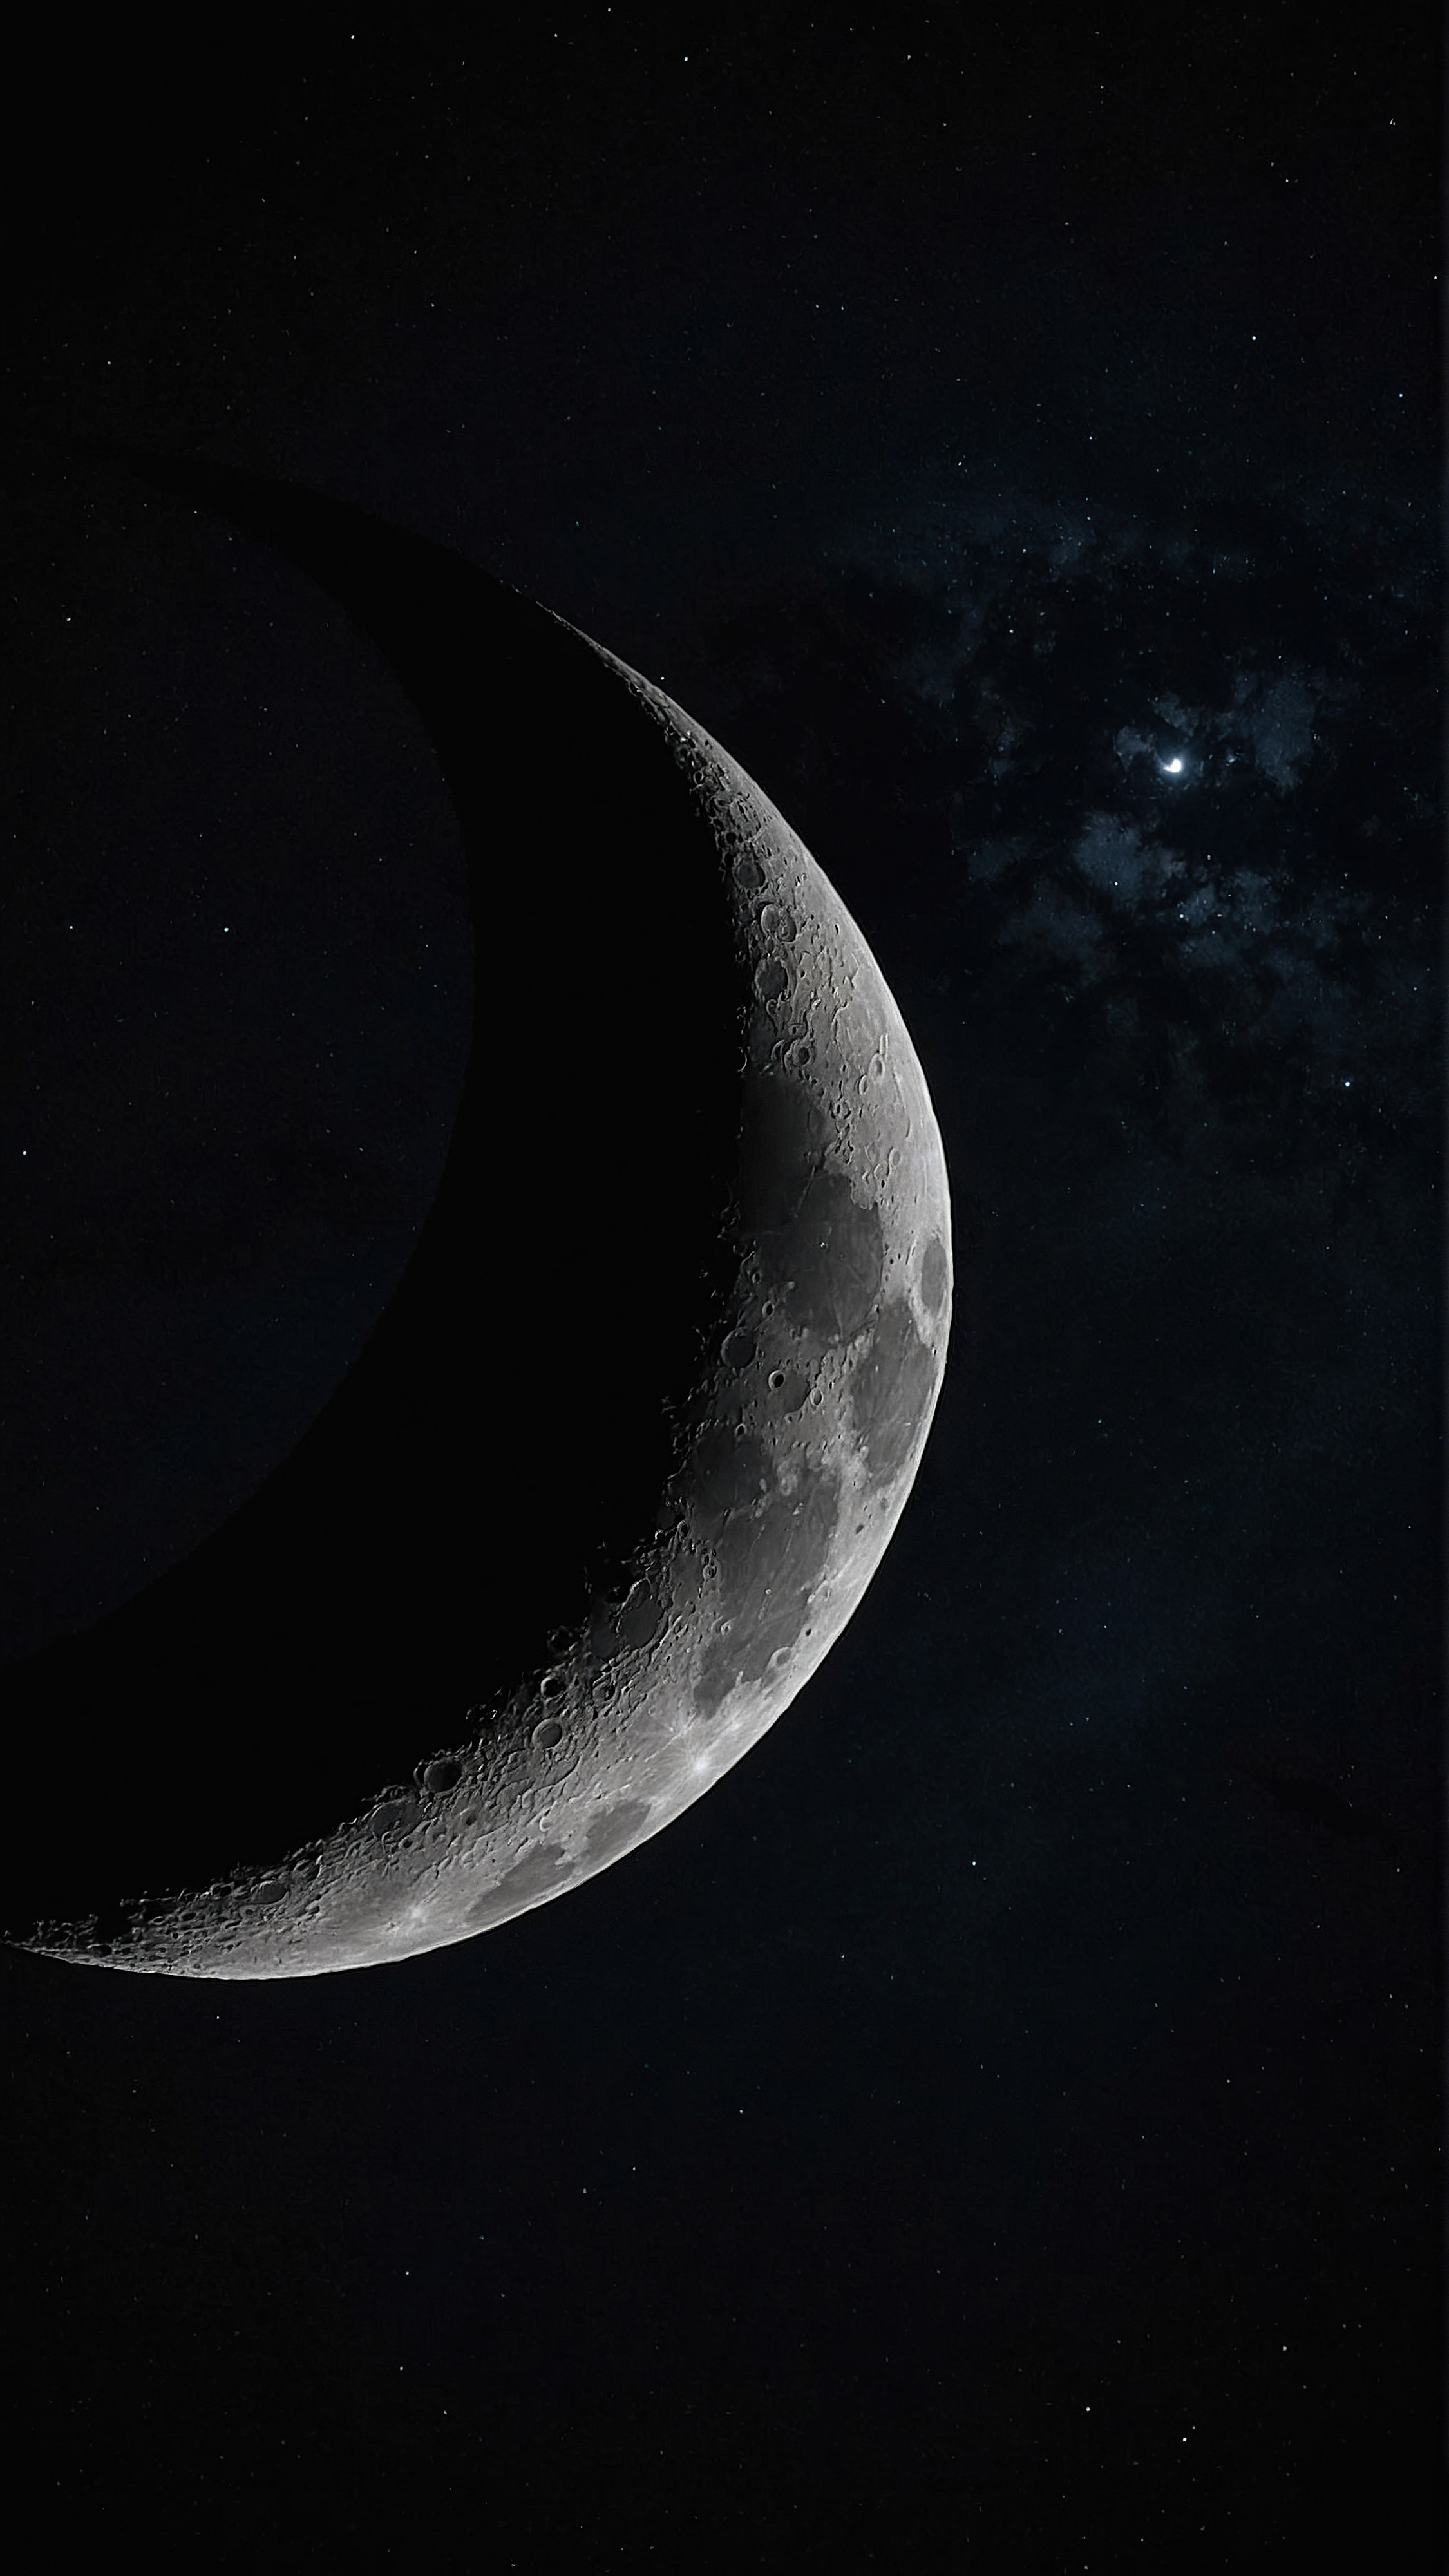 Discover the allure of space through an all-black iPhone wallpaper, featuring a detailed crescent moon, illuminated against the dark backdrop of space.